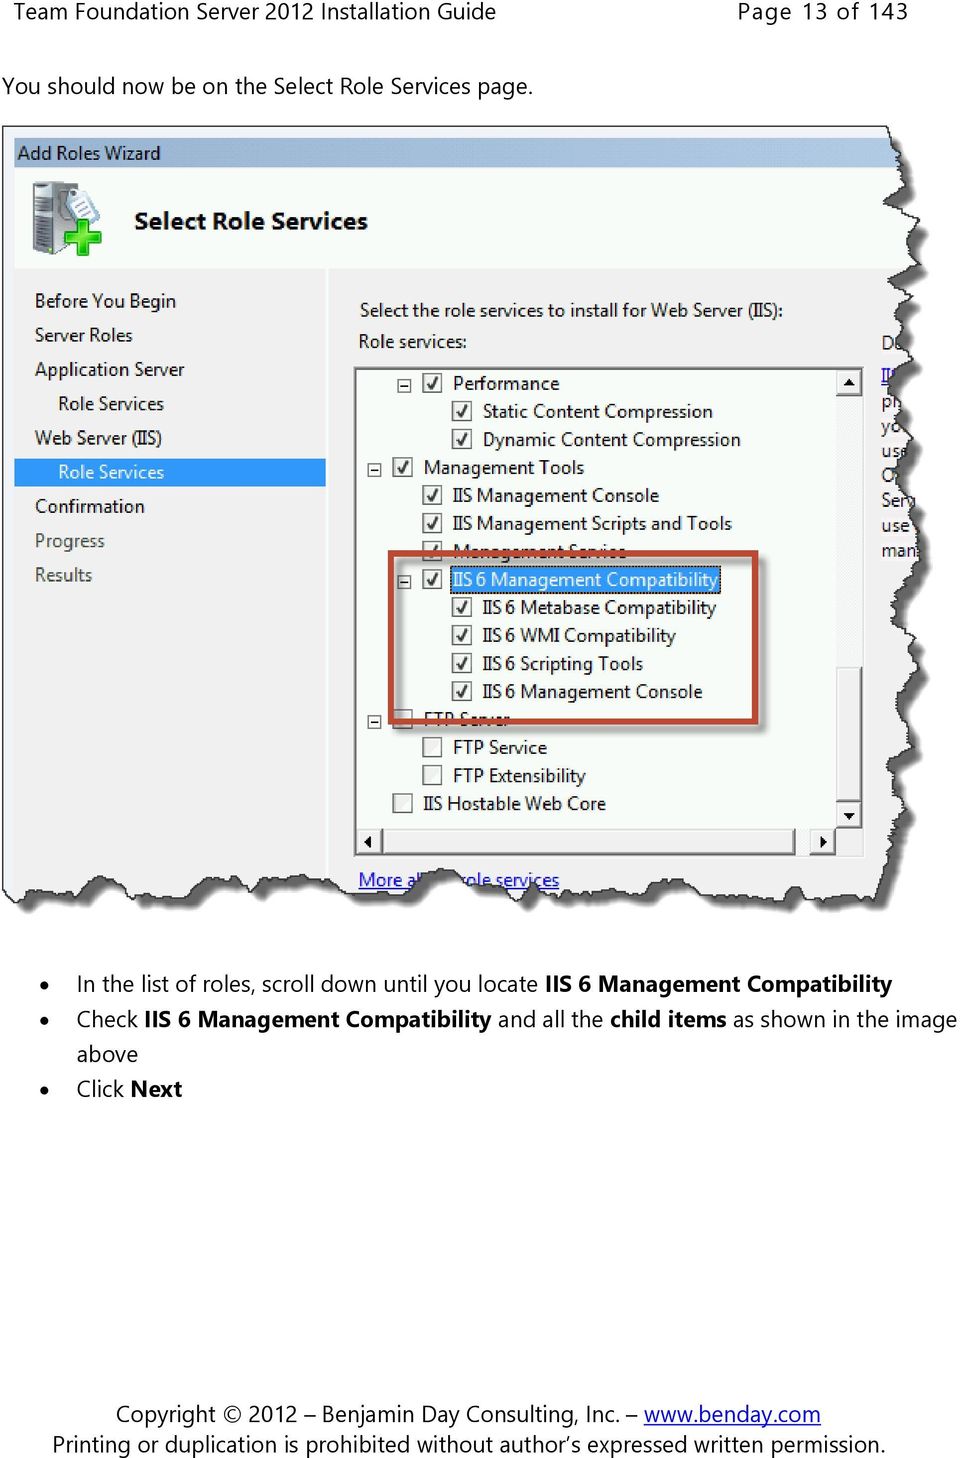 In the list of roles, scroll down until you locate IIS 6 Management